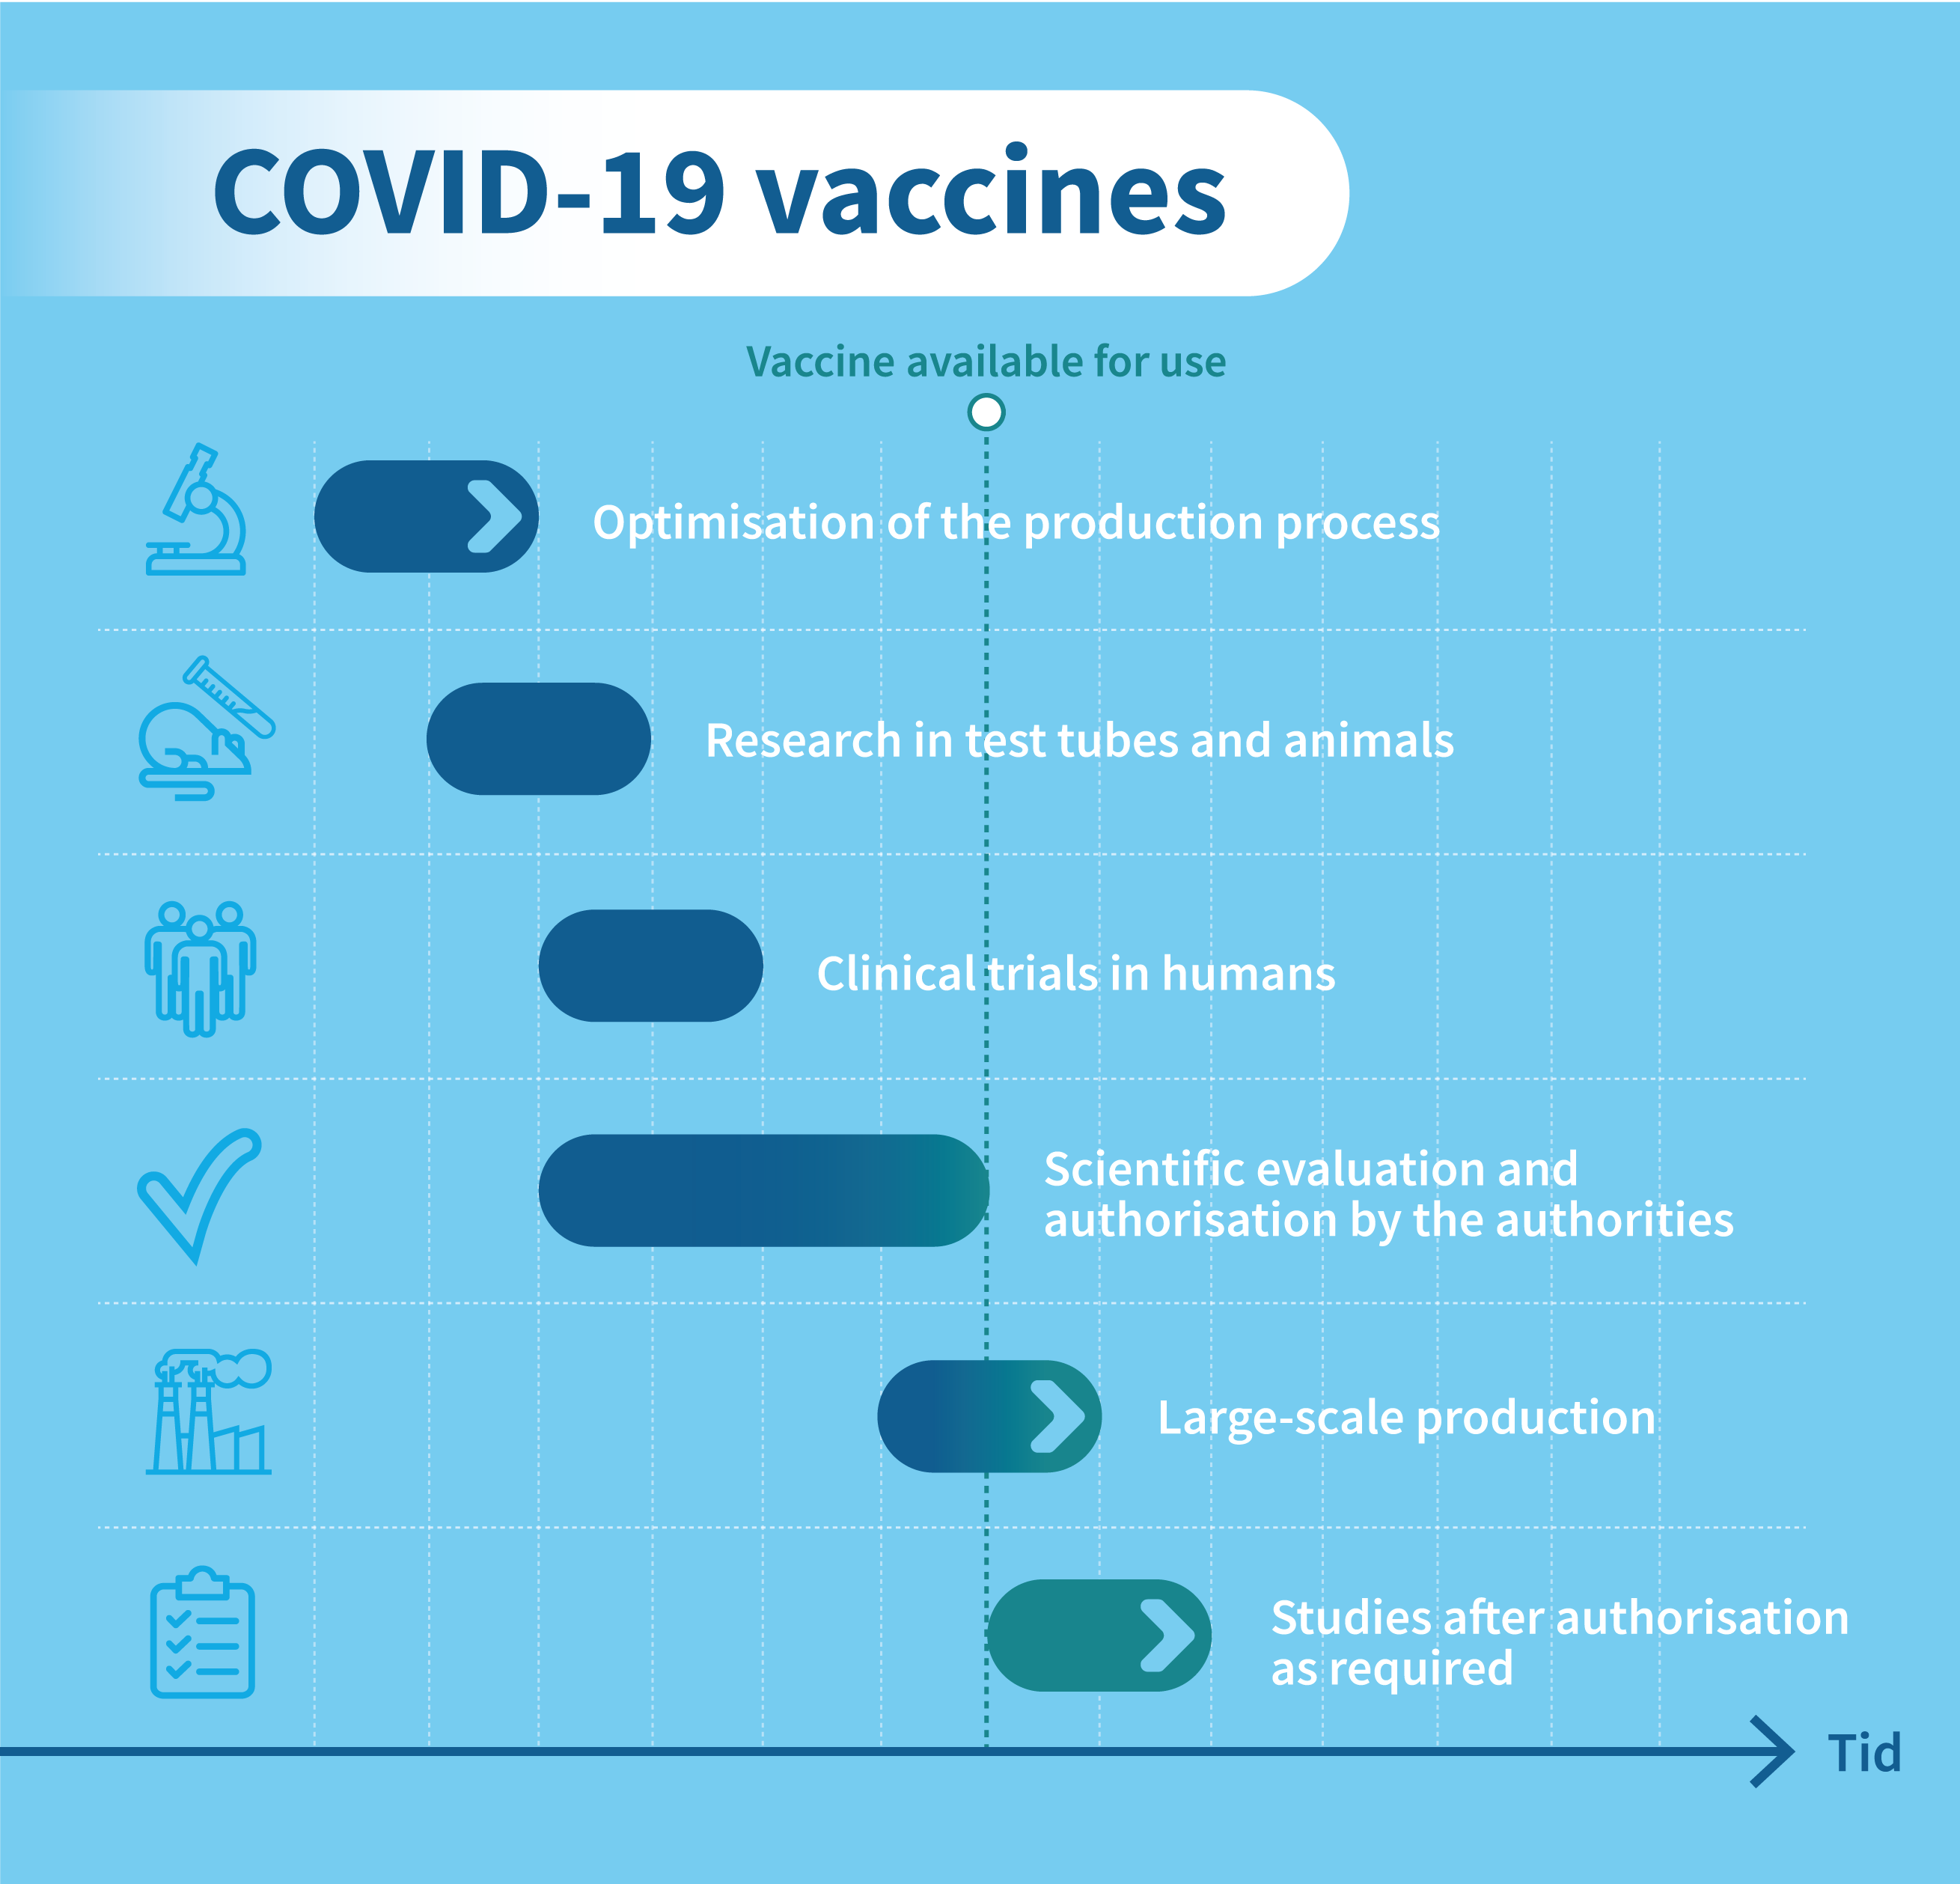 Accelerated authorisation process for COVID-19 vaccines